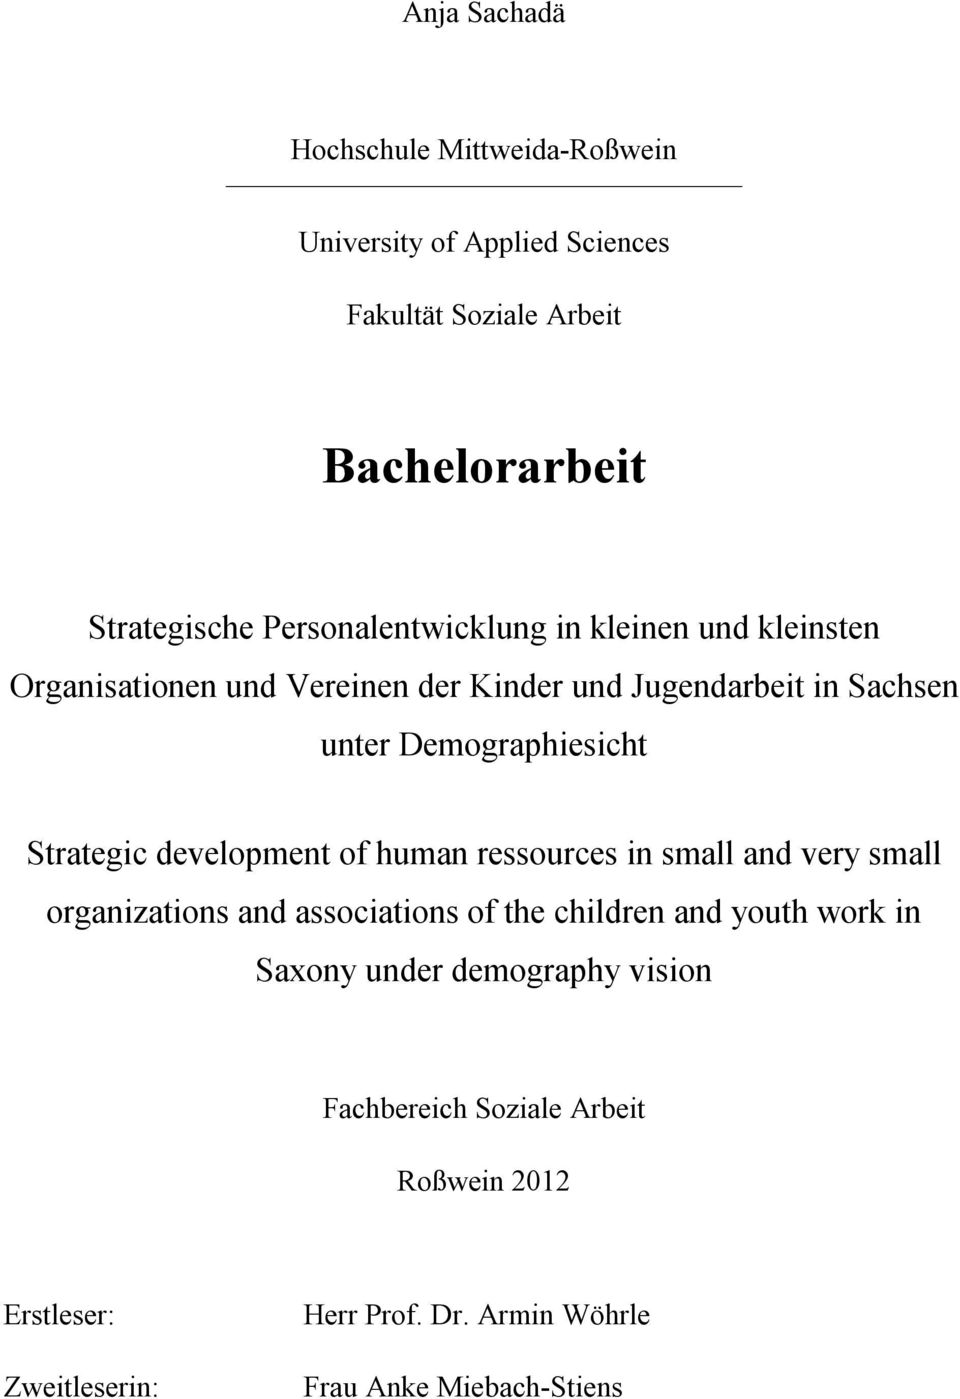 Strategic development of human ressources in small and very small organizations and associations of the children and youth work in